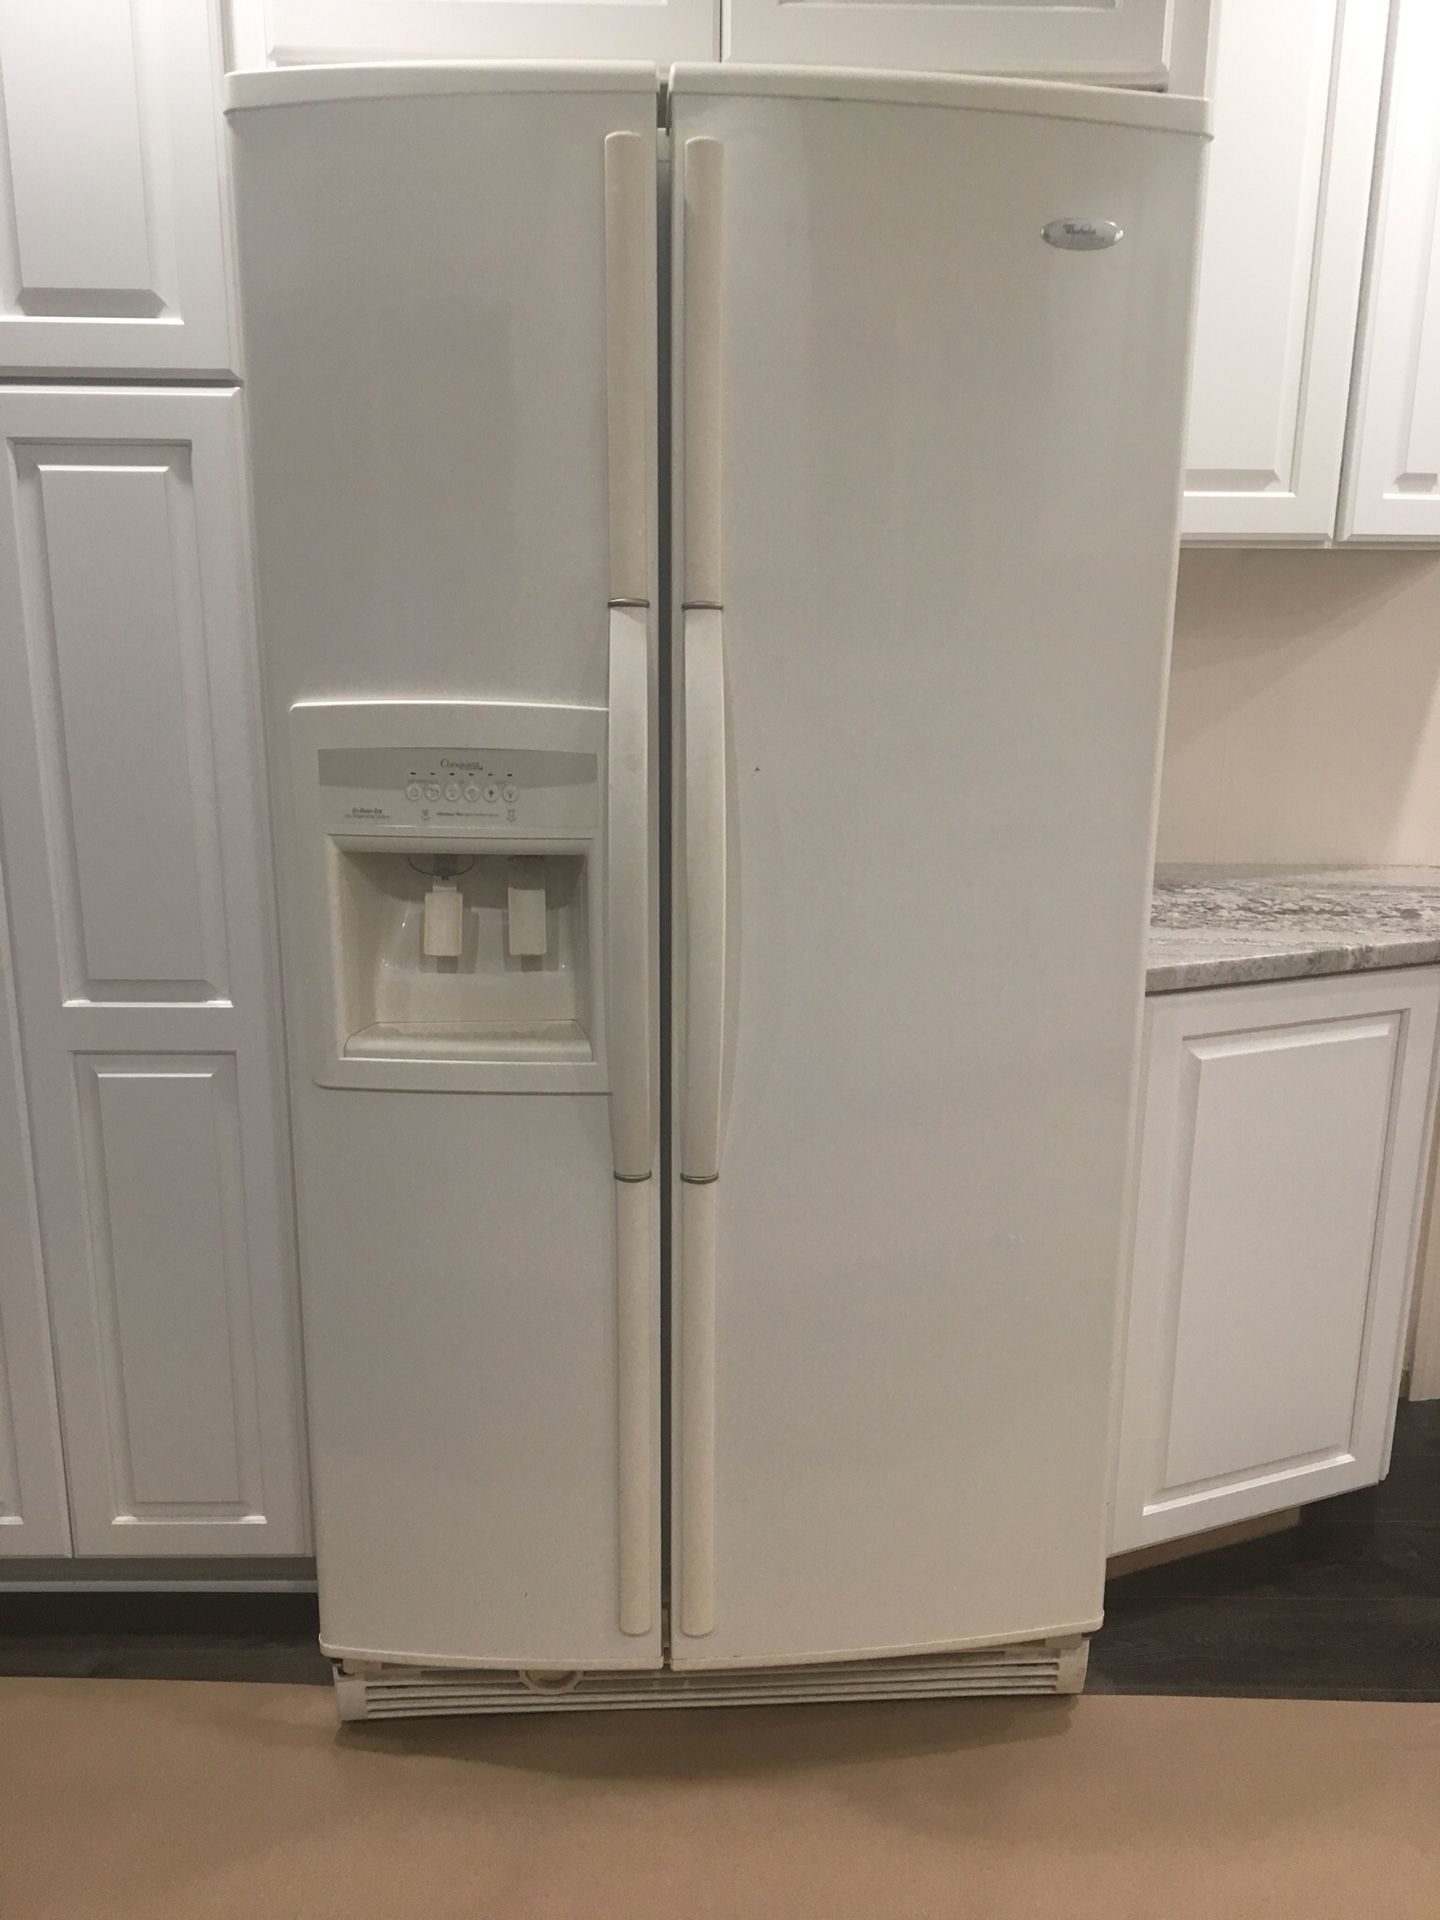 Whirlpool Gold refrigerator. Color Bisque